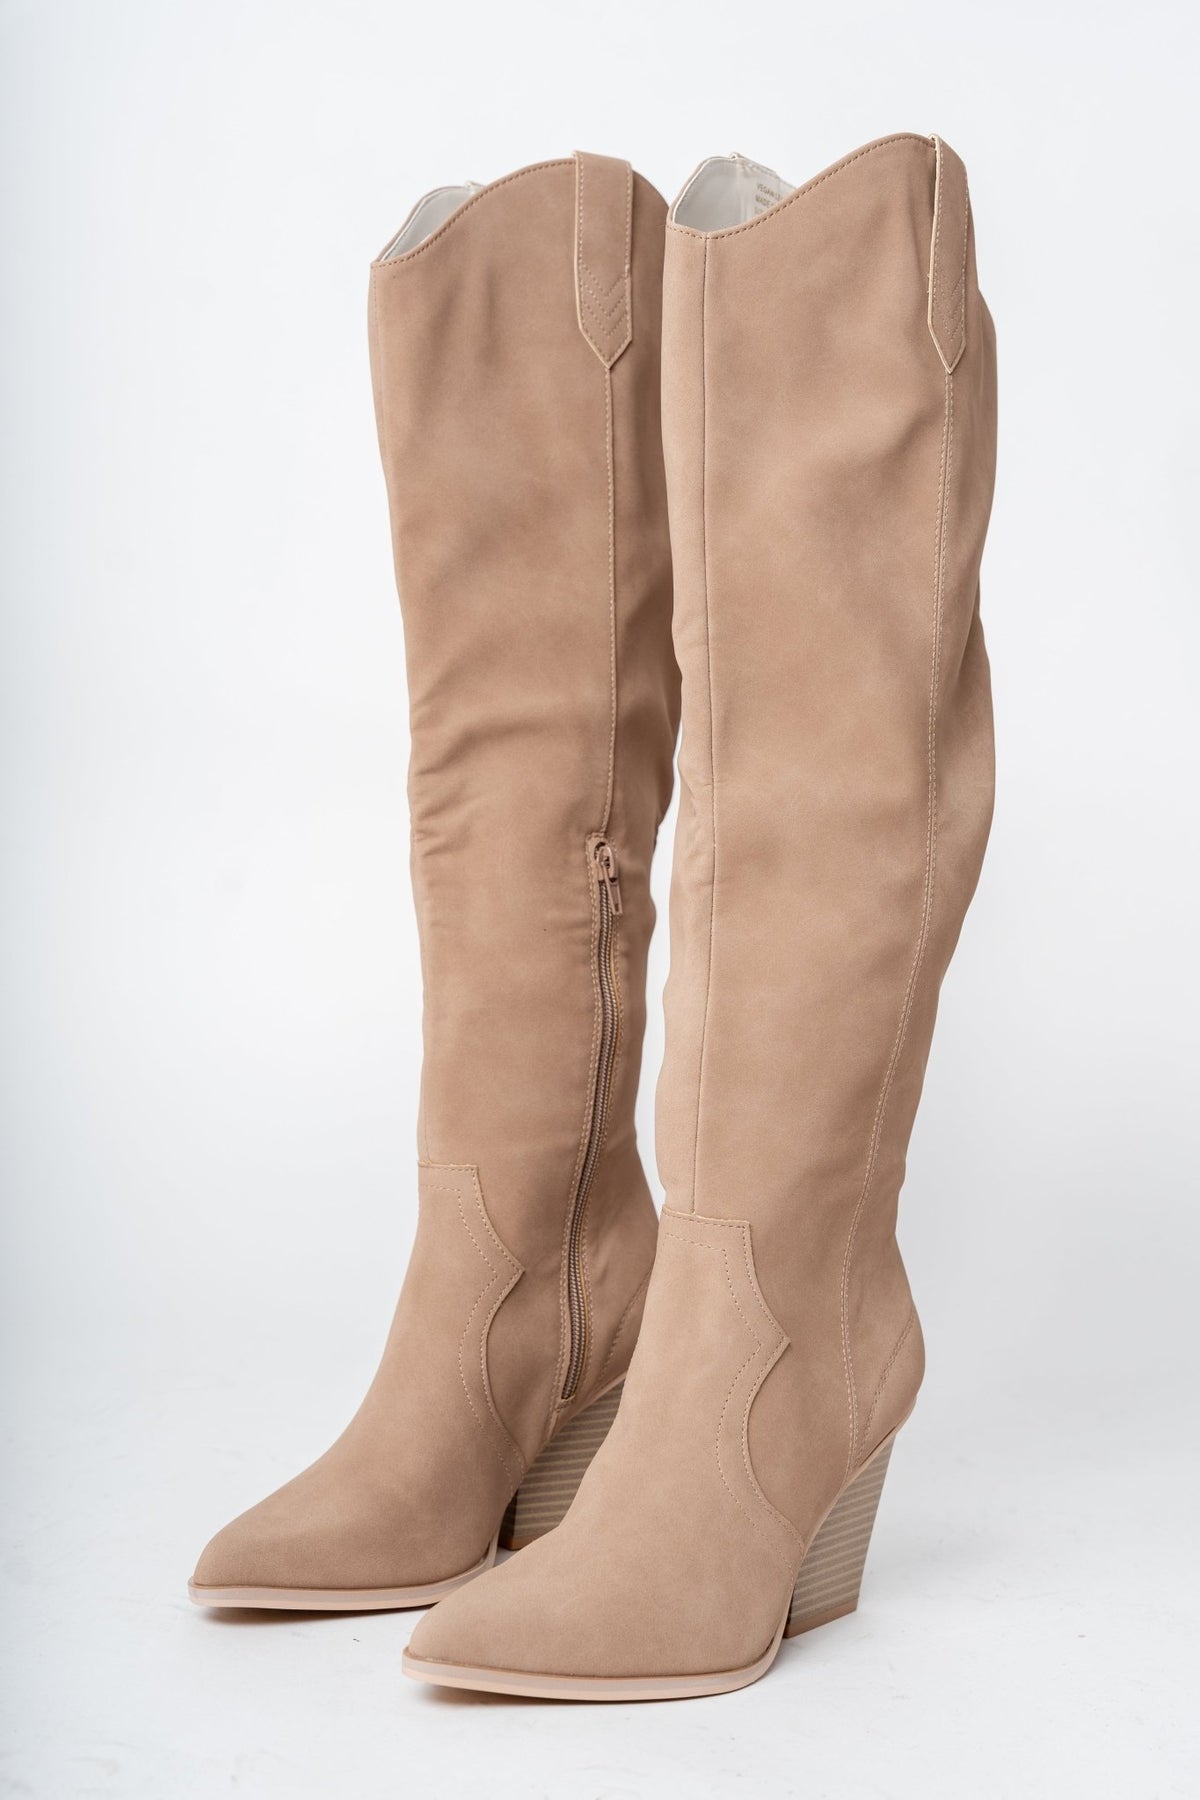 Saipan knee high boot cedar wood - Cute shoes - Trendy Shoes at Lush Fashion Lounge Boutique in Oklahoma City